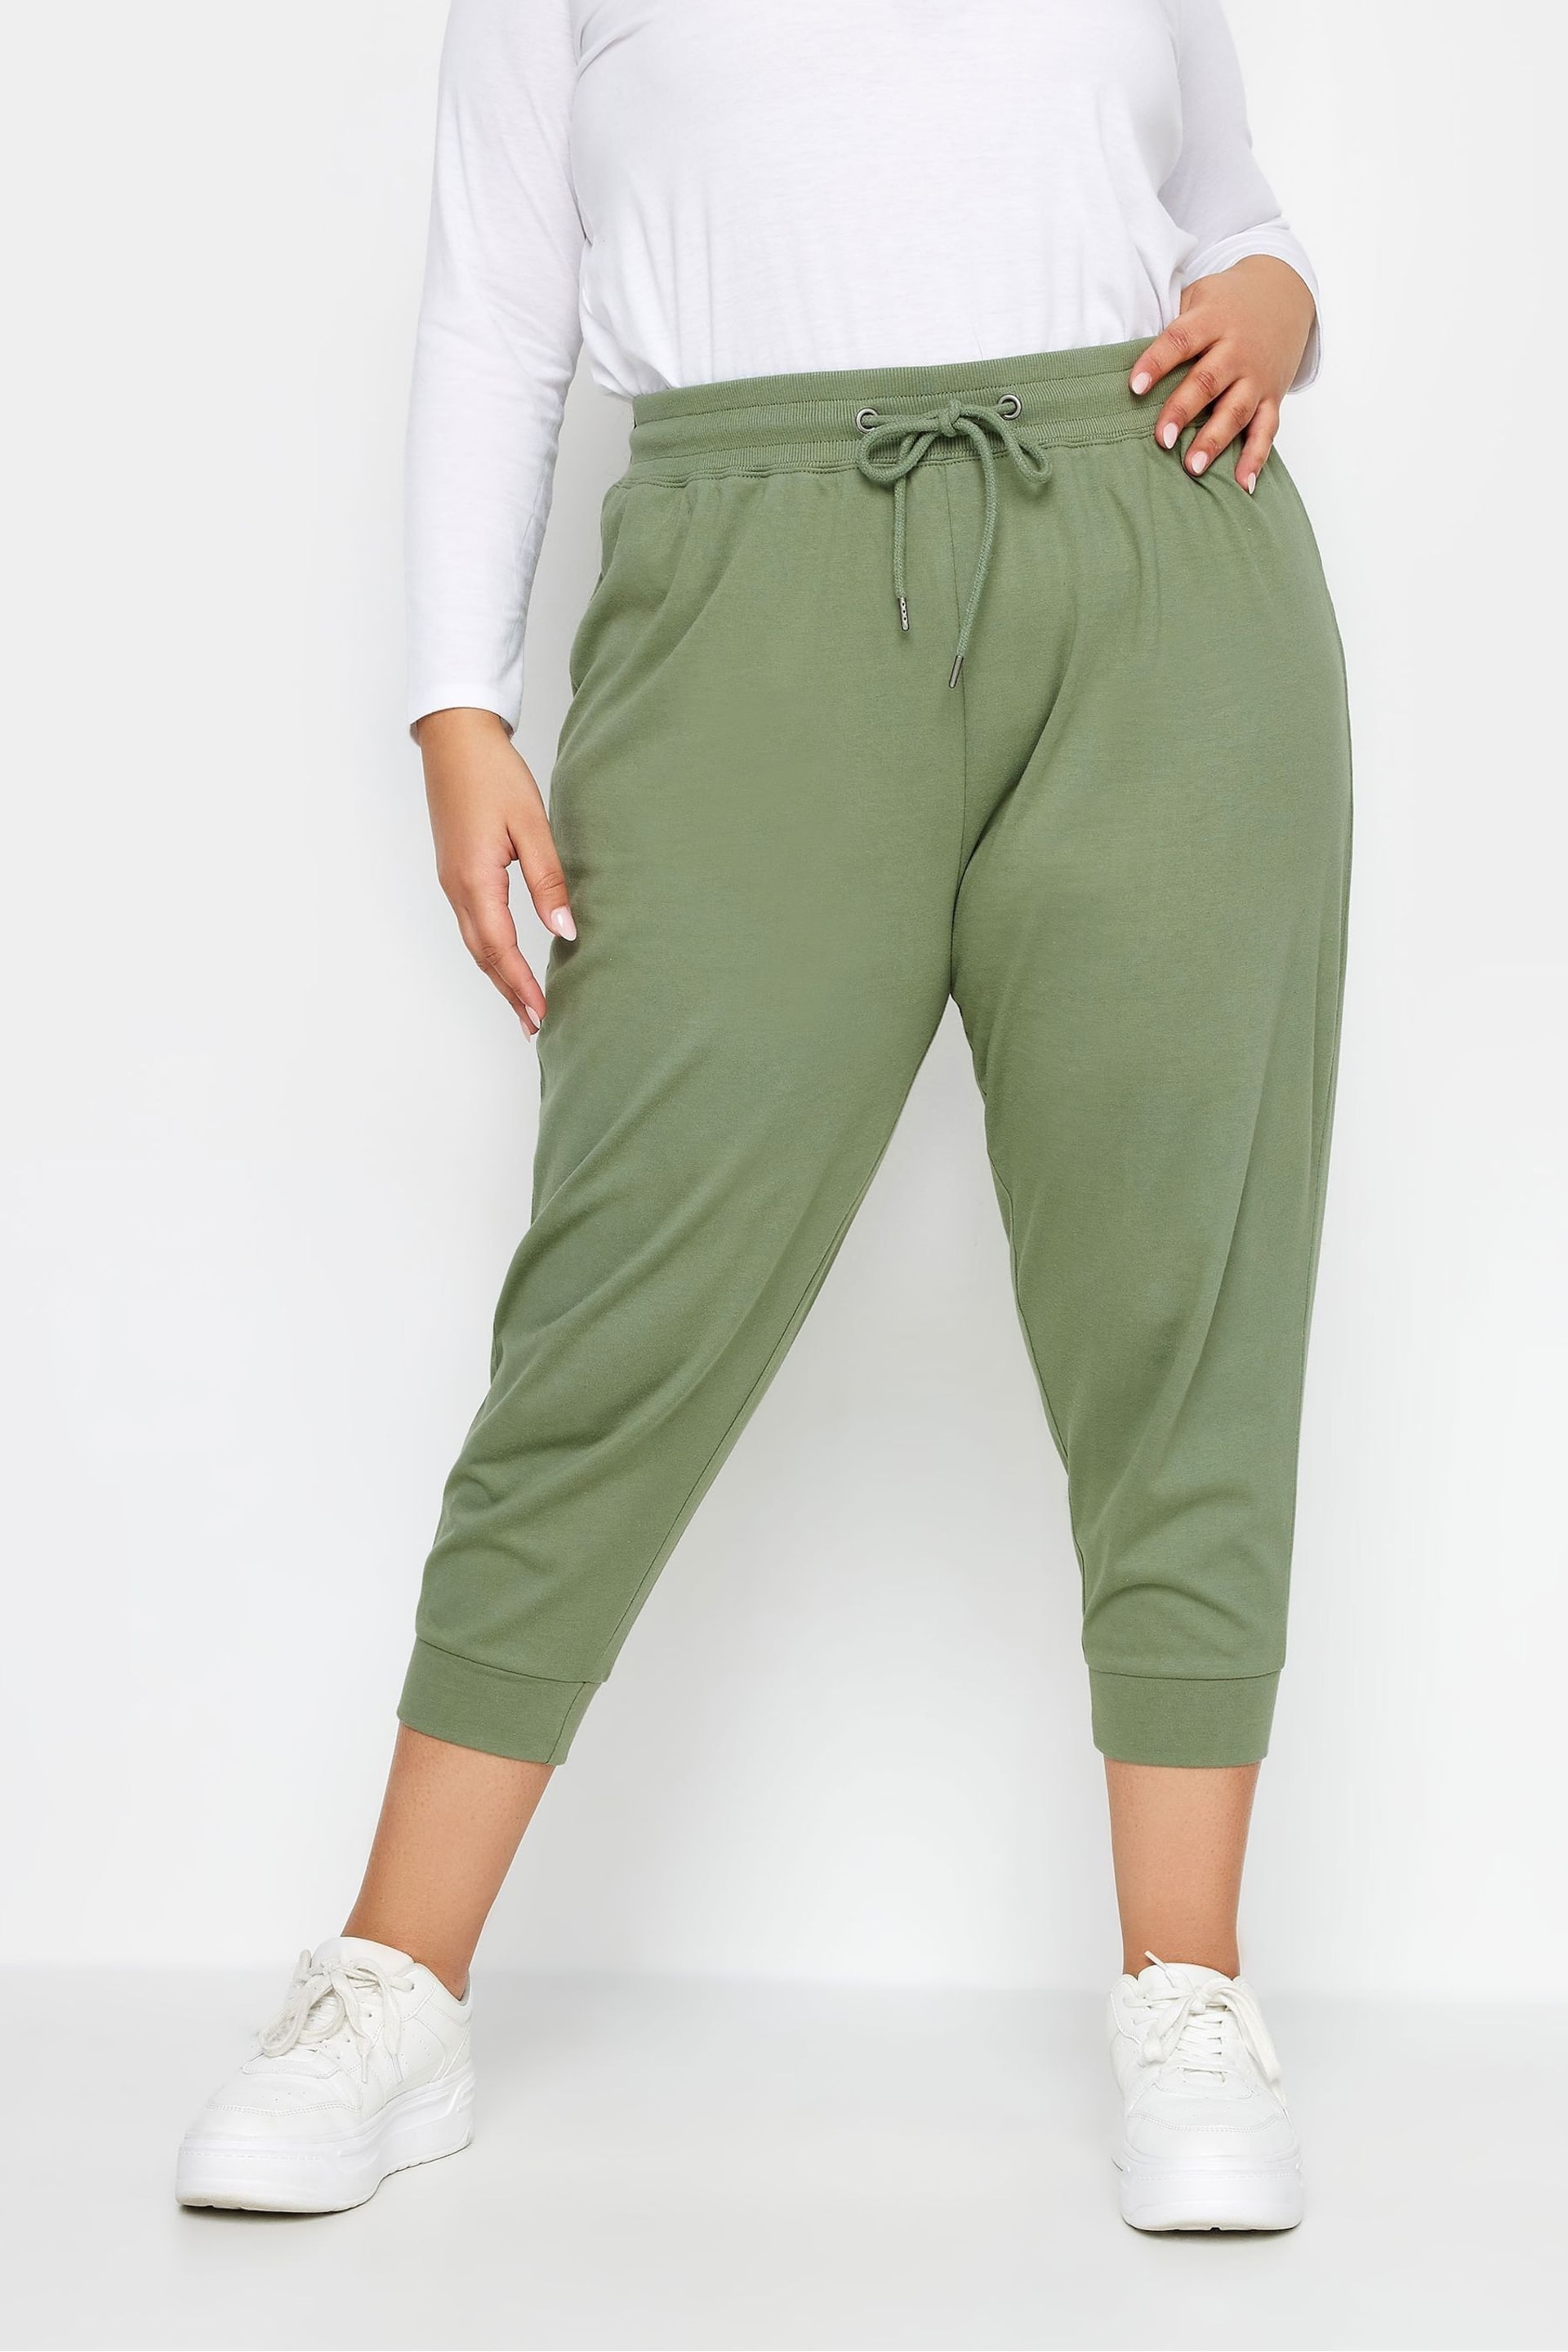 Yours Curve Green Cropped Joggers - Image 1 of 3